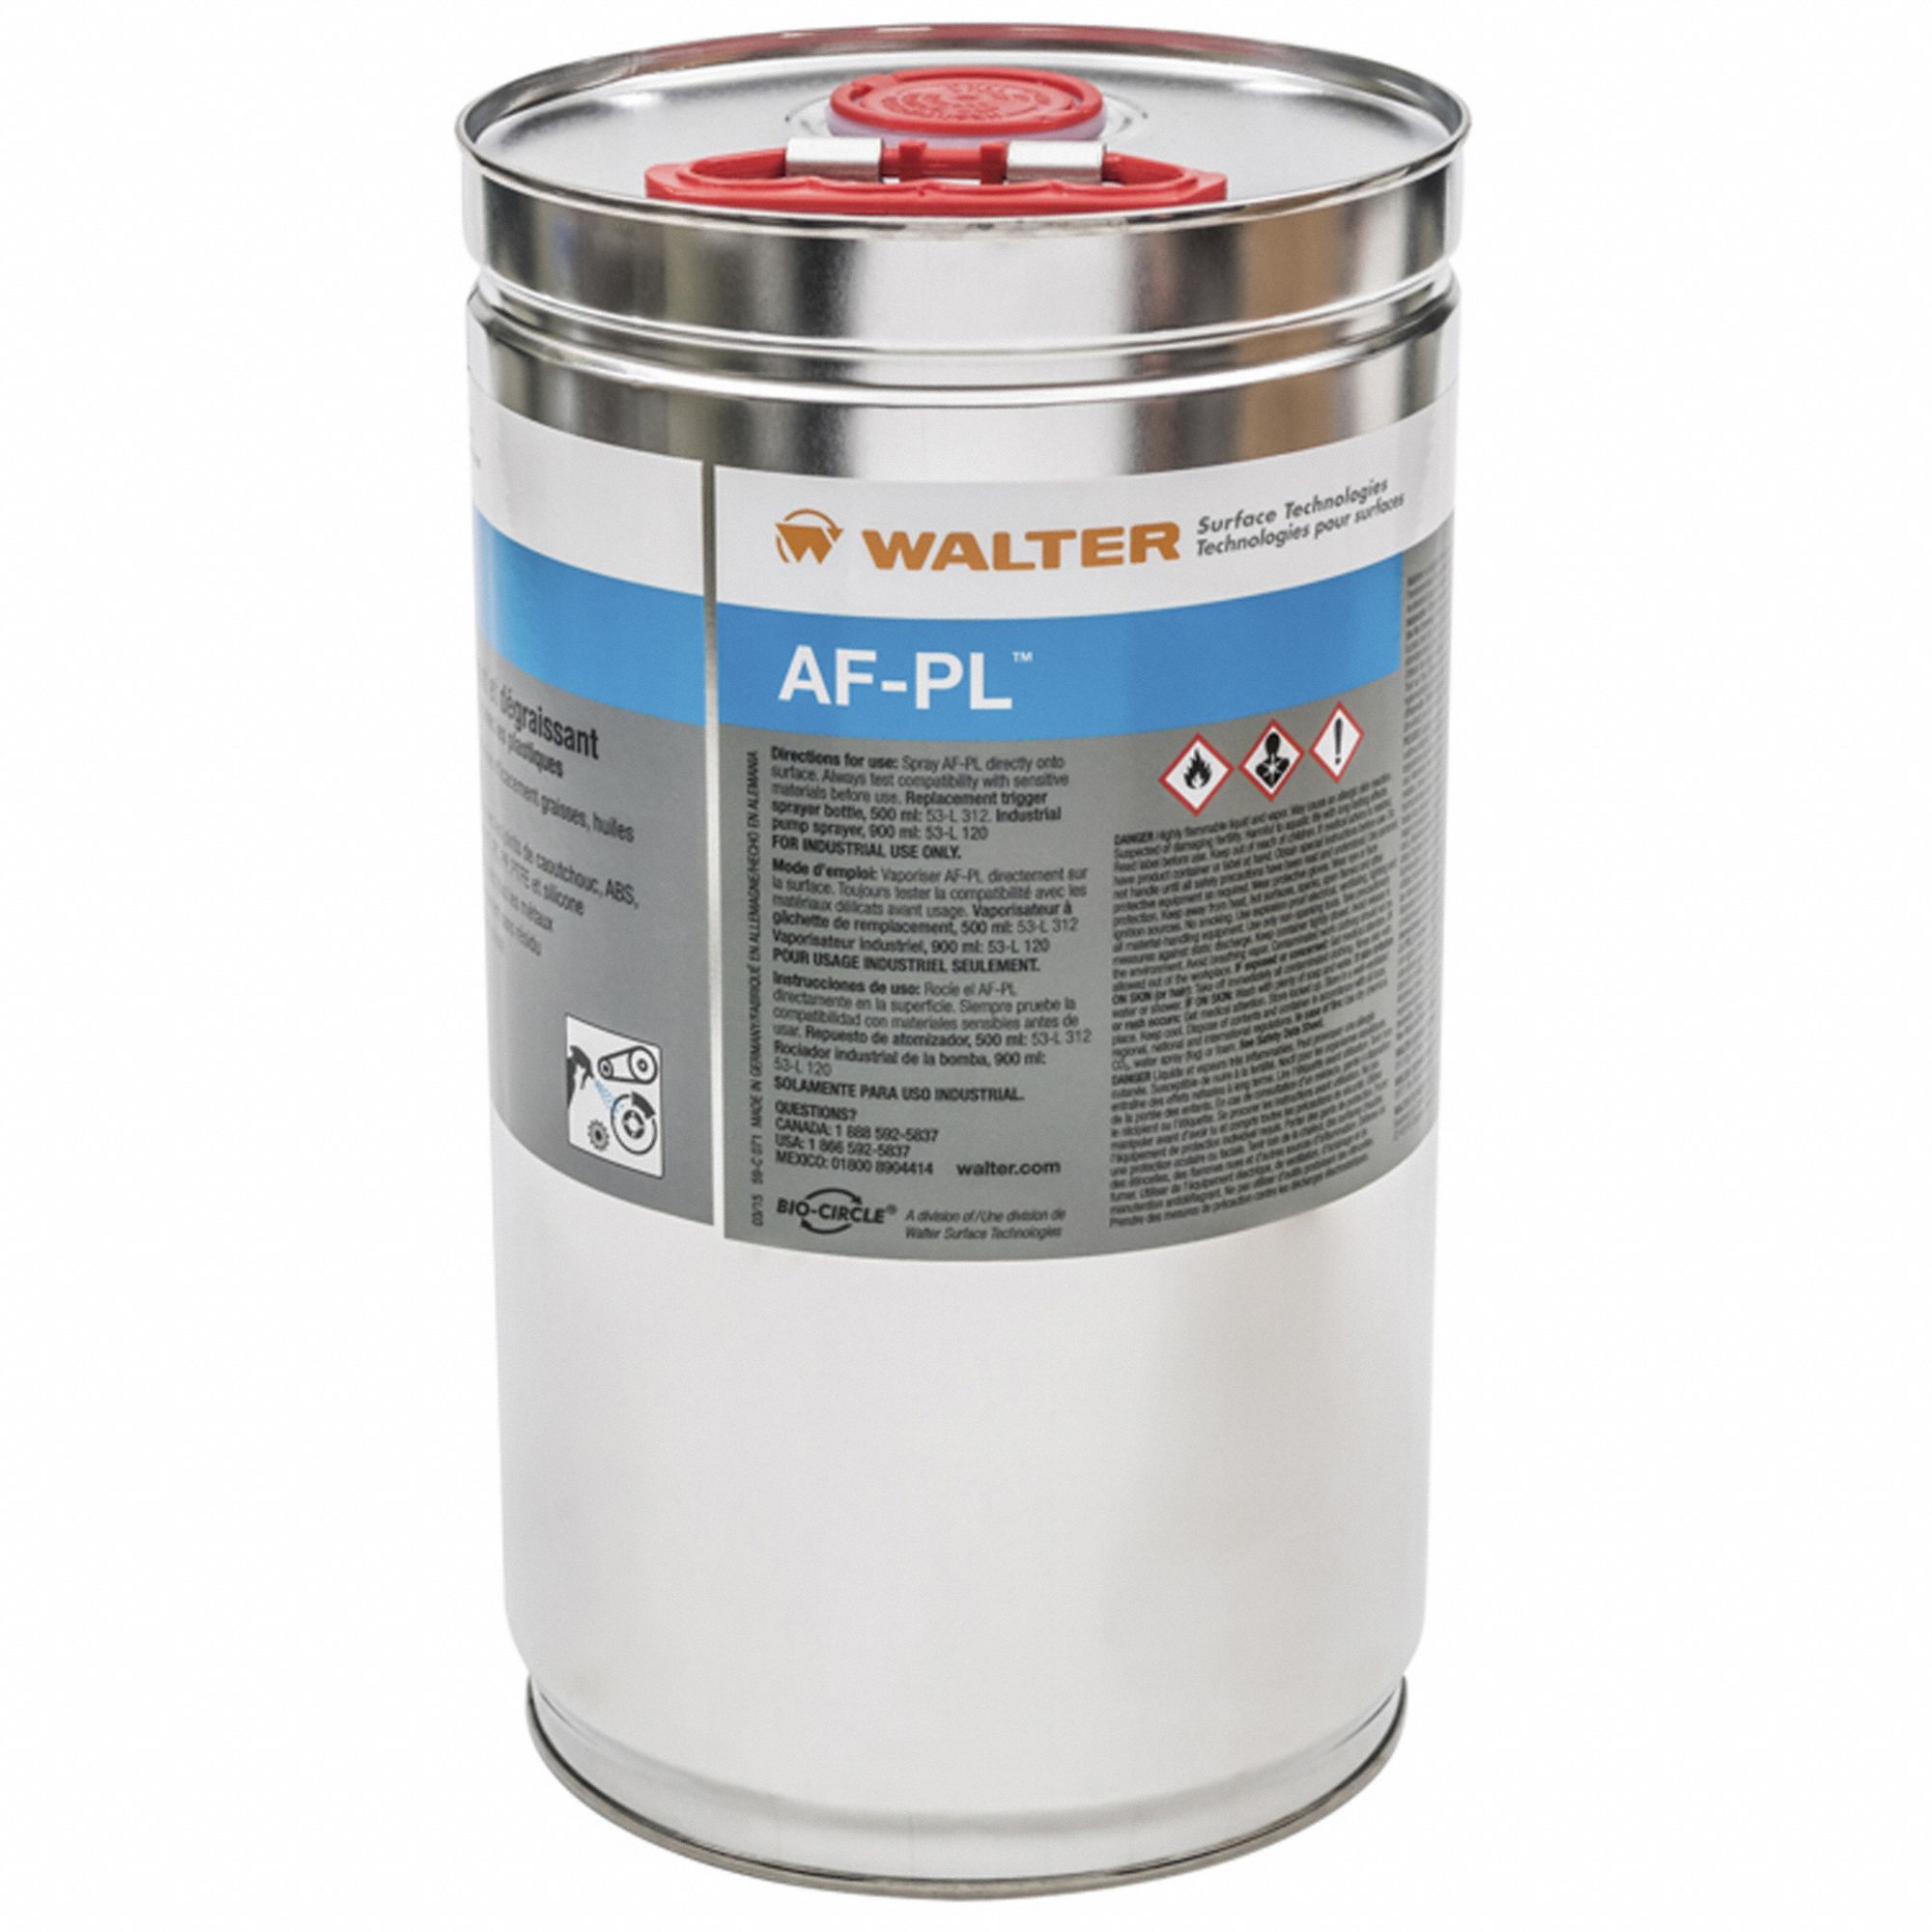 Parts Washer Cleaner: Solvent, Adhesives/Dirt/Glue/Grease/Grime/Ink/Oil/Paint/Wax, Metals